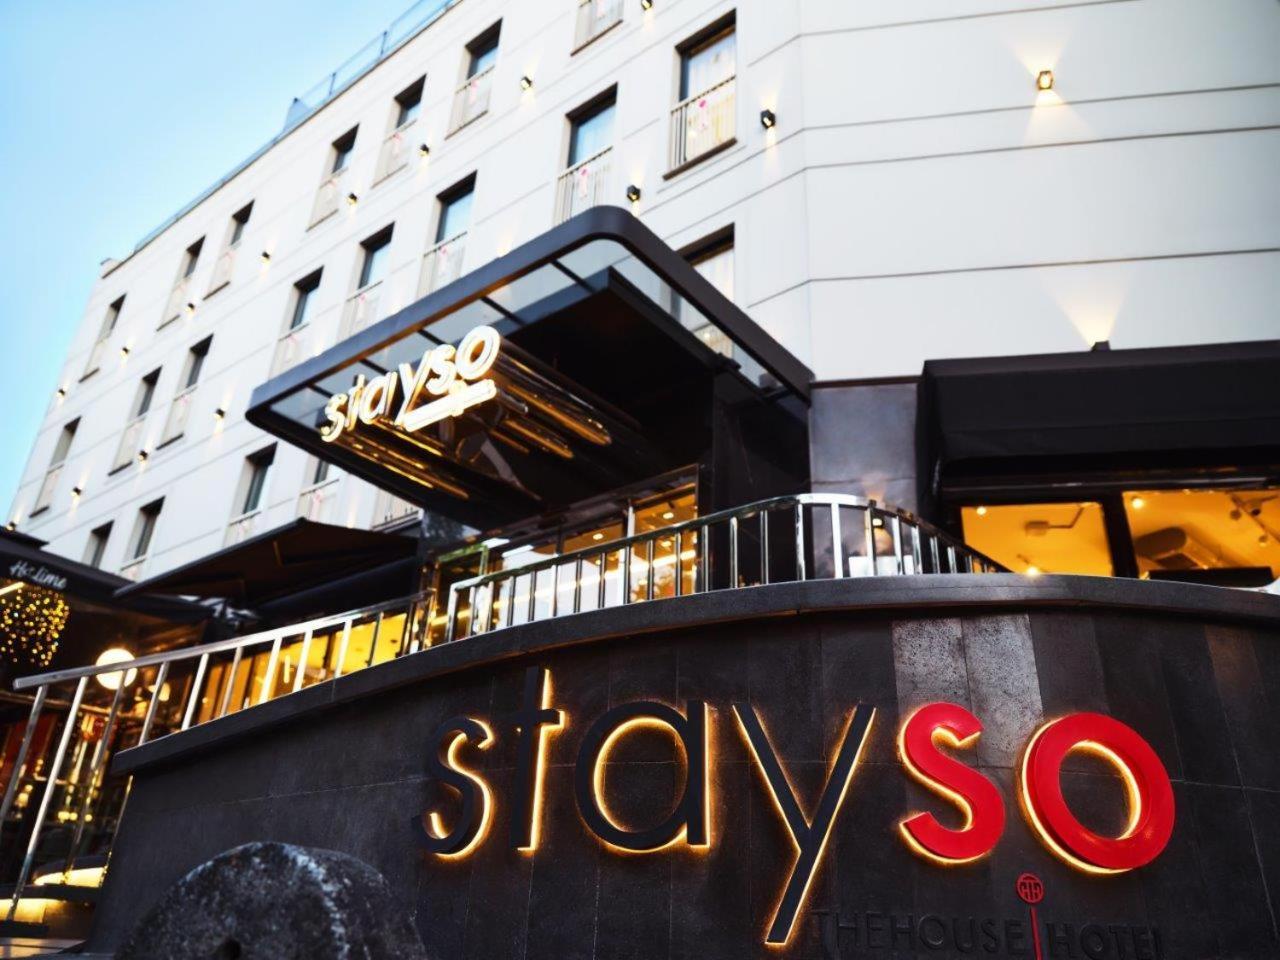 Stayso The House Istambul Exterior foto